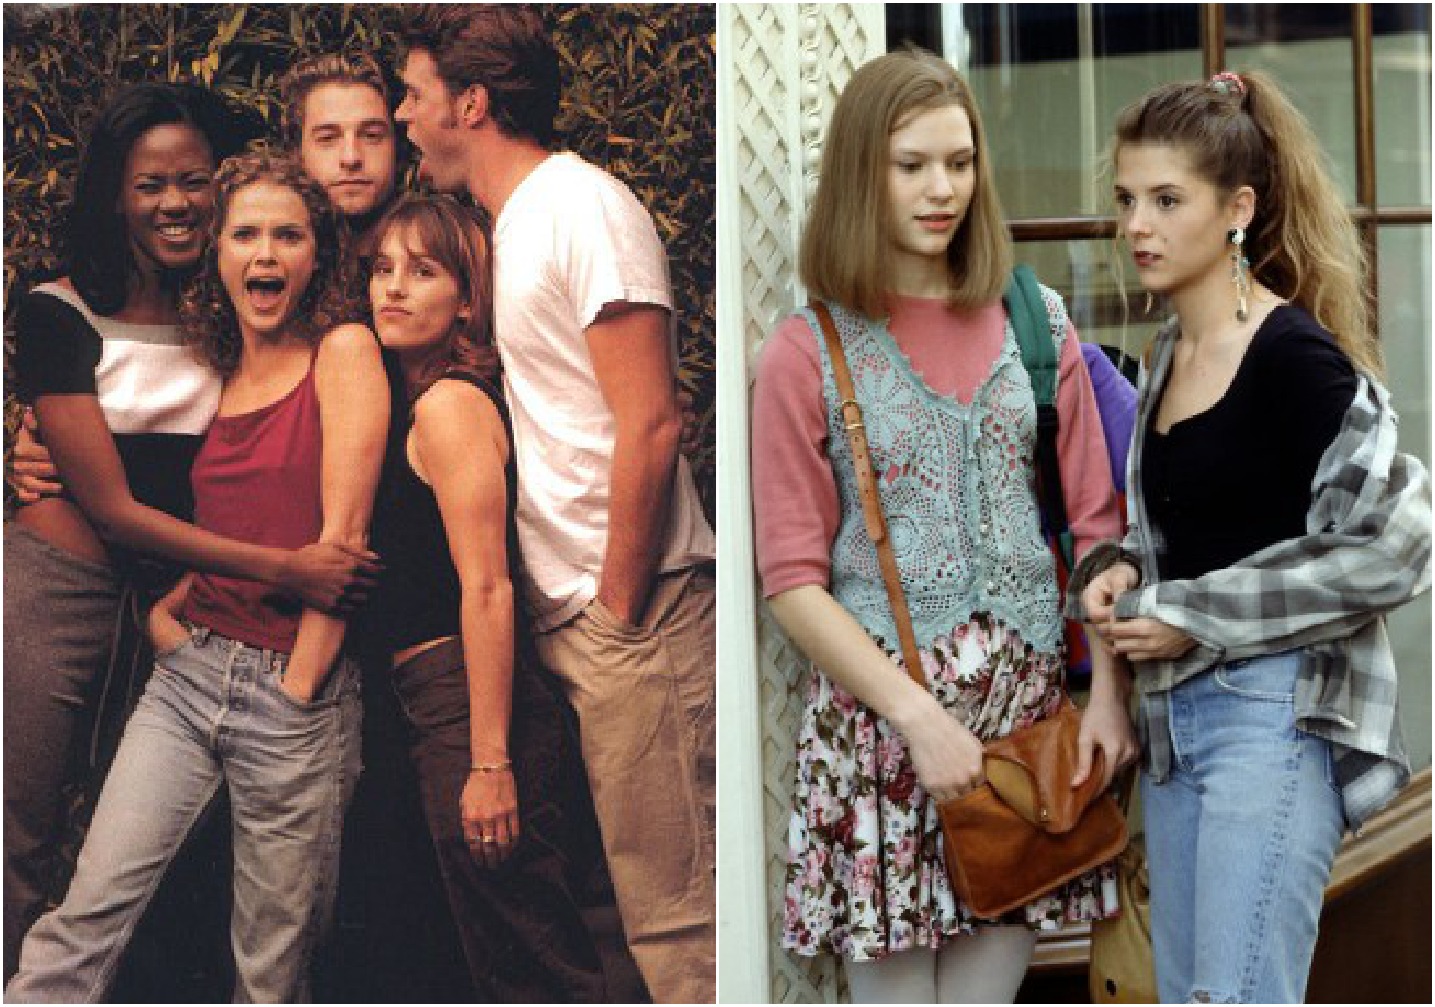 90s Fashion Trends For Teenage Girls